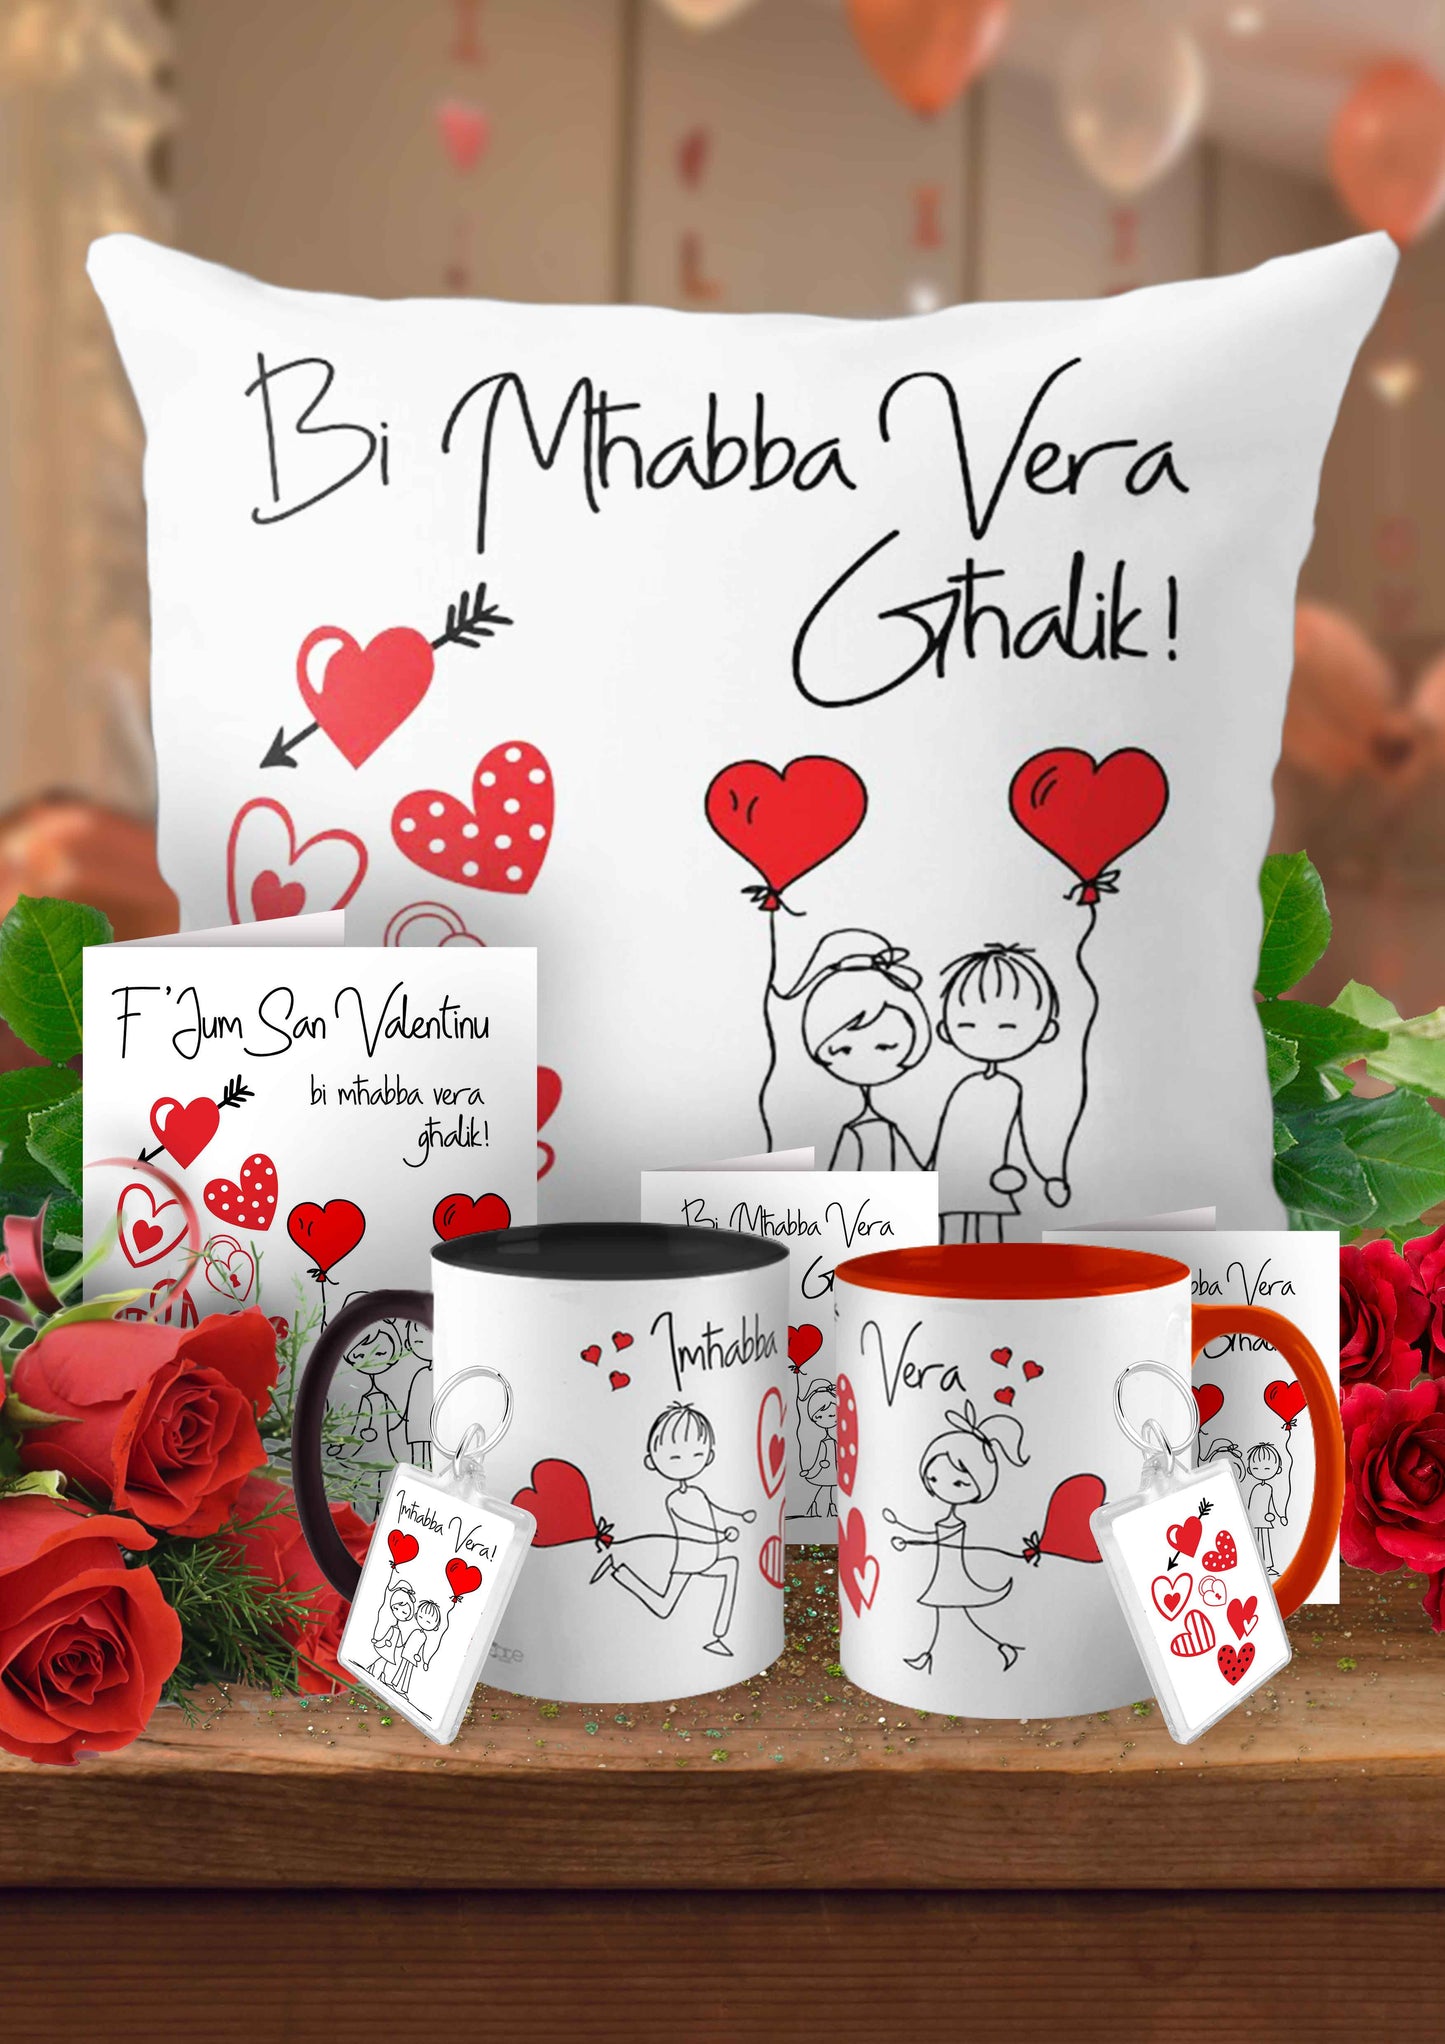 Complete set for St. Valentines (For Loved One)